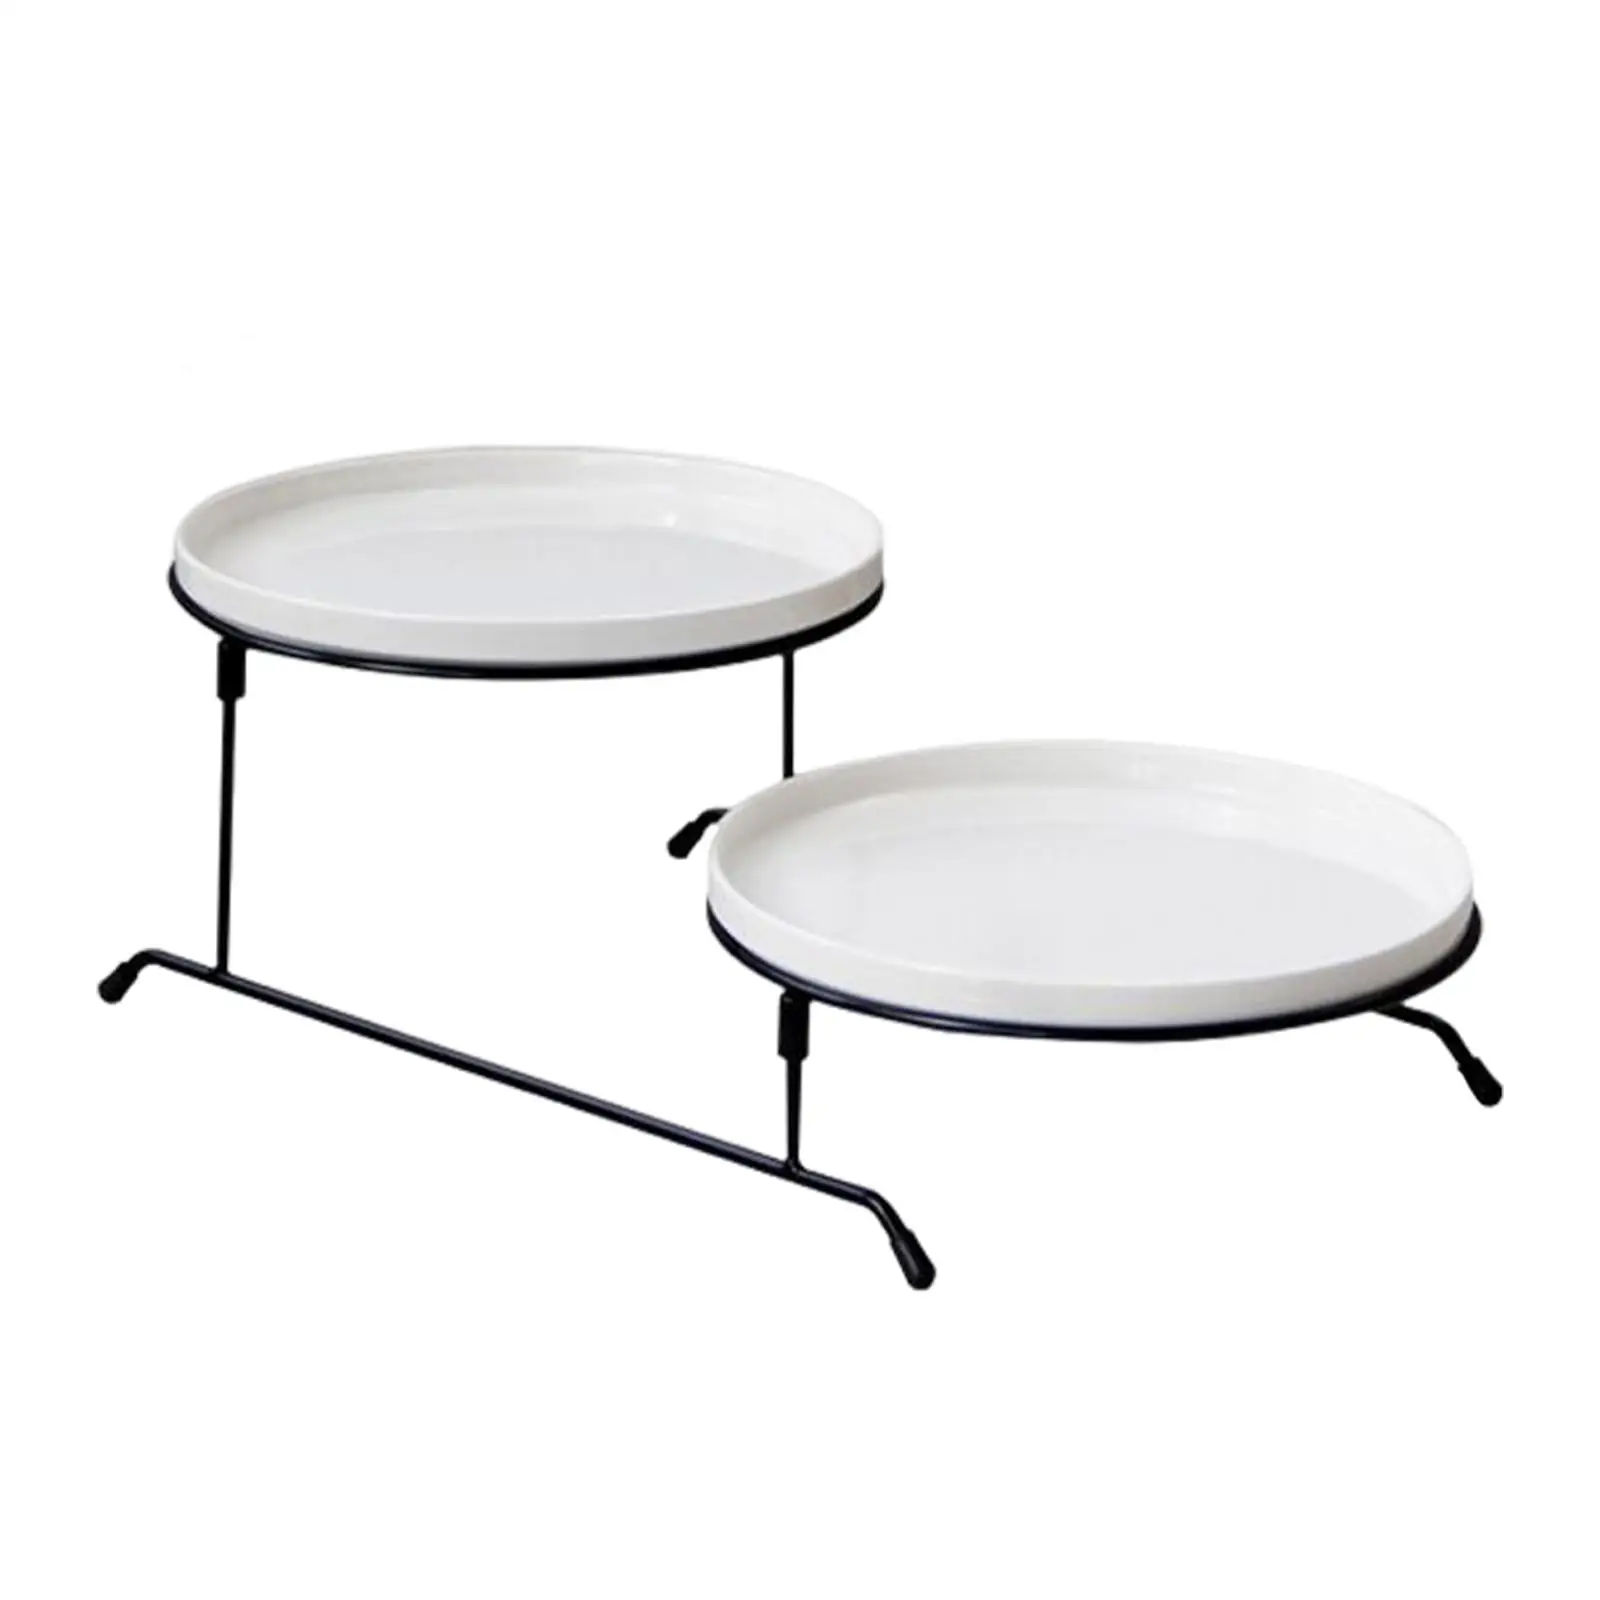 2 Tiered Serving Stand Dessert Serving Plate Food Display Stand Cupcake Stand Restaurant Valentine`S Day Wedding Home